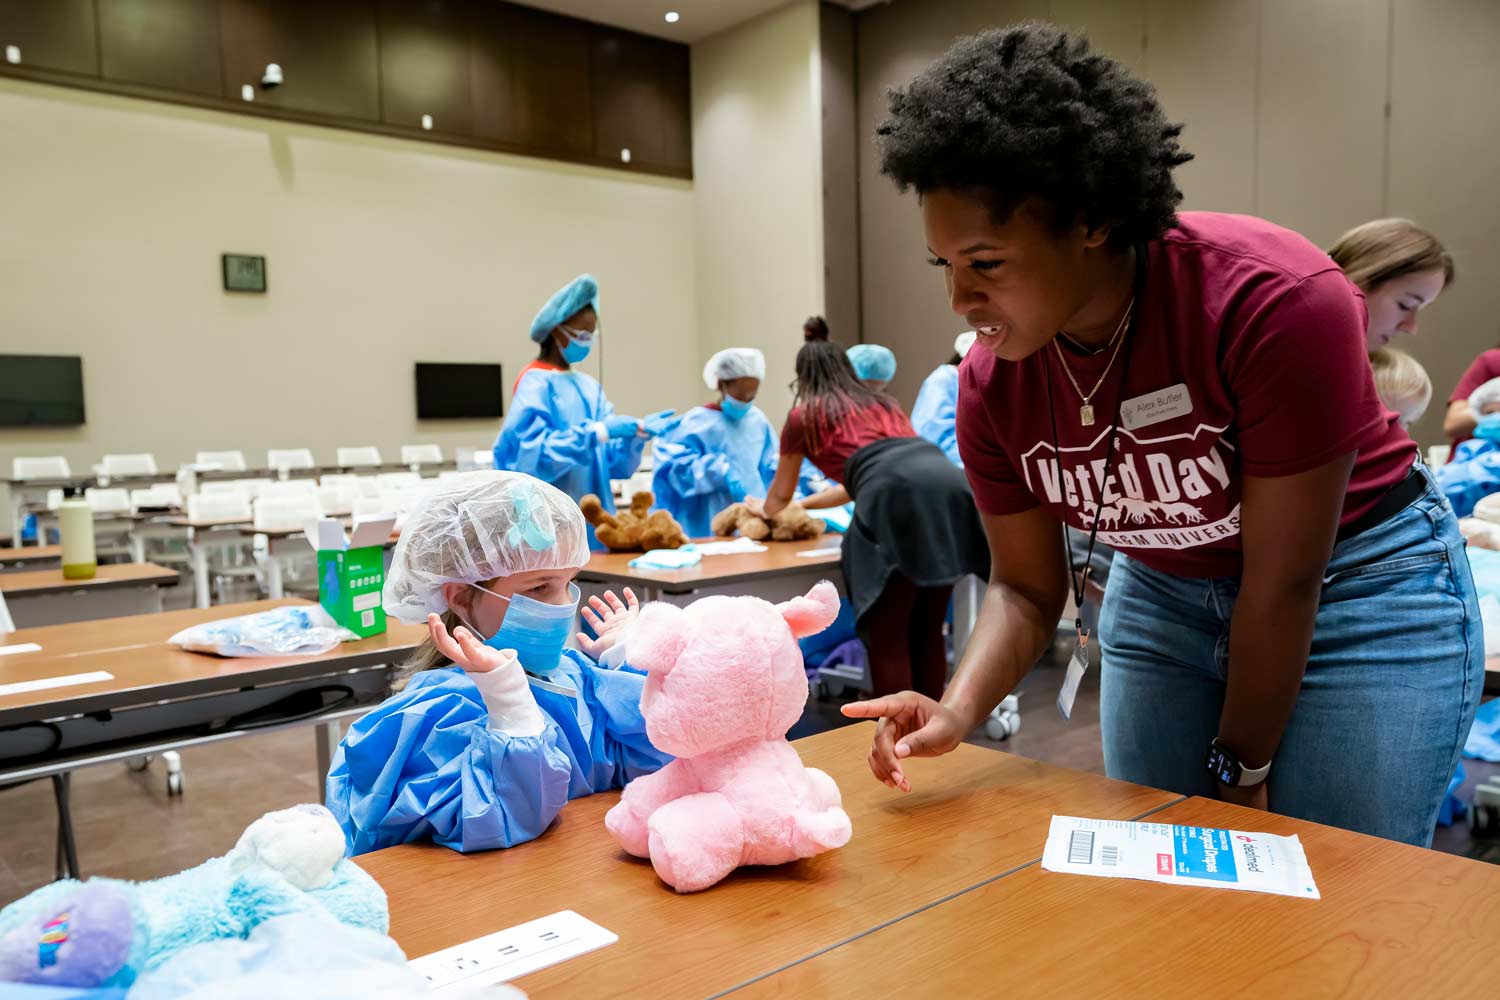 A Texas A&M Student helps teach a child about having a career in veterinary medicine